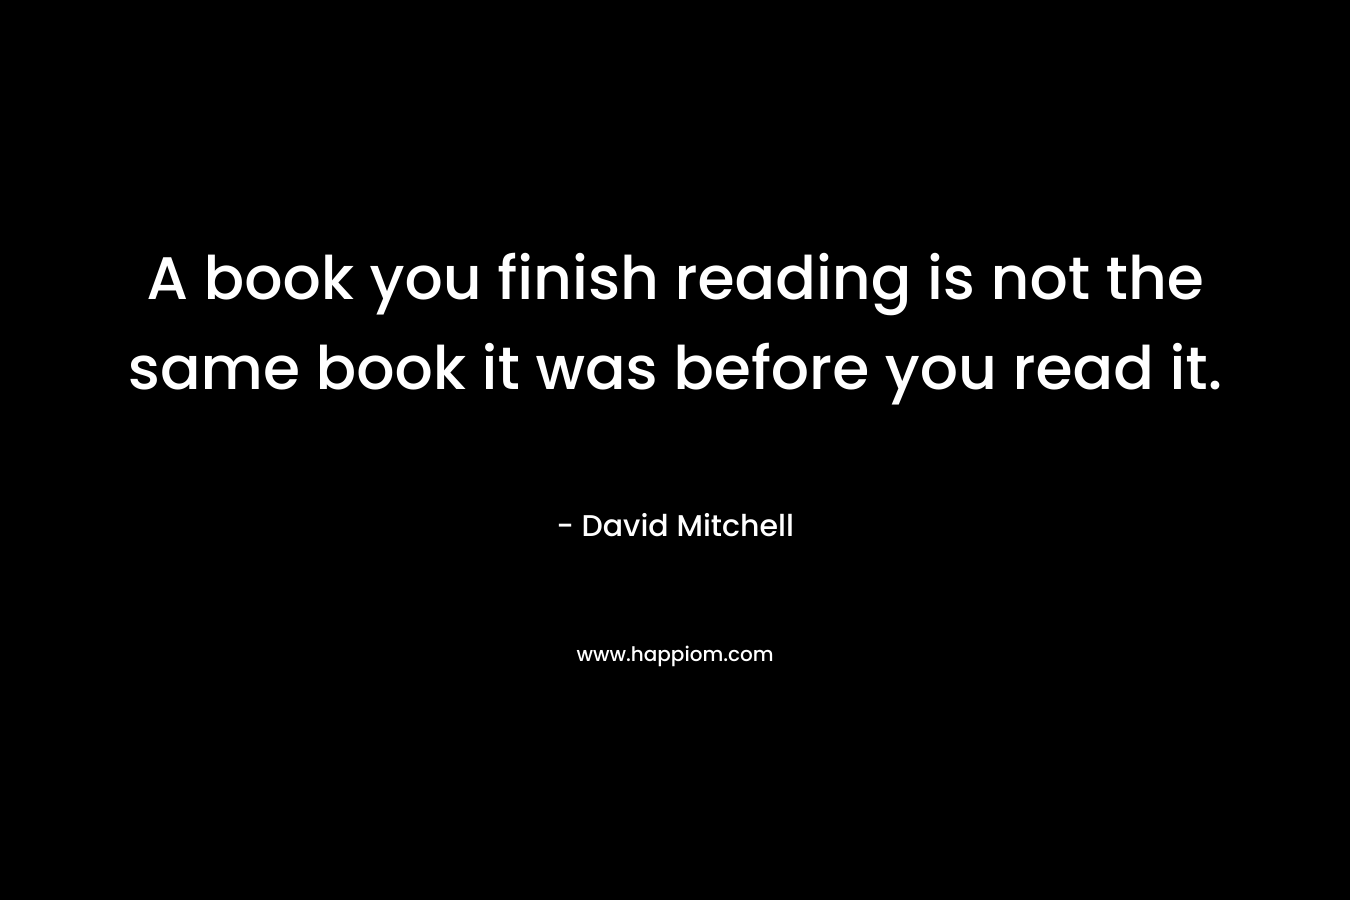 A book you finish reading is not the same book it was before you read it.